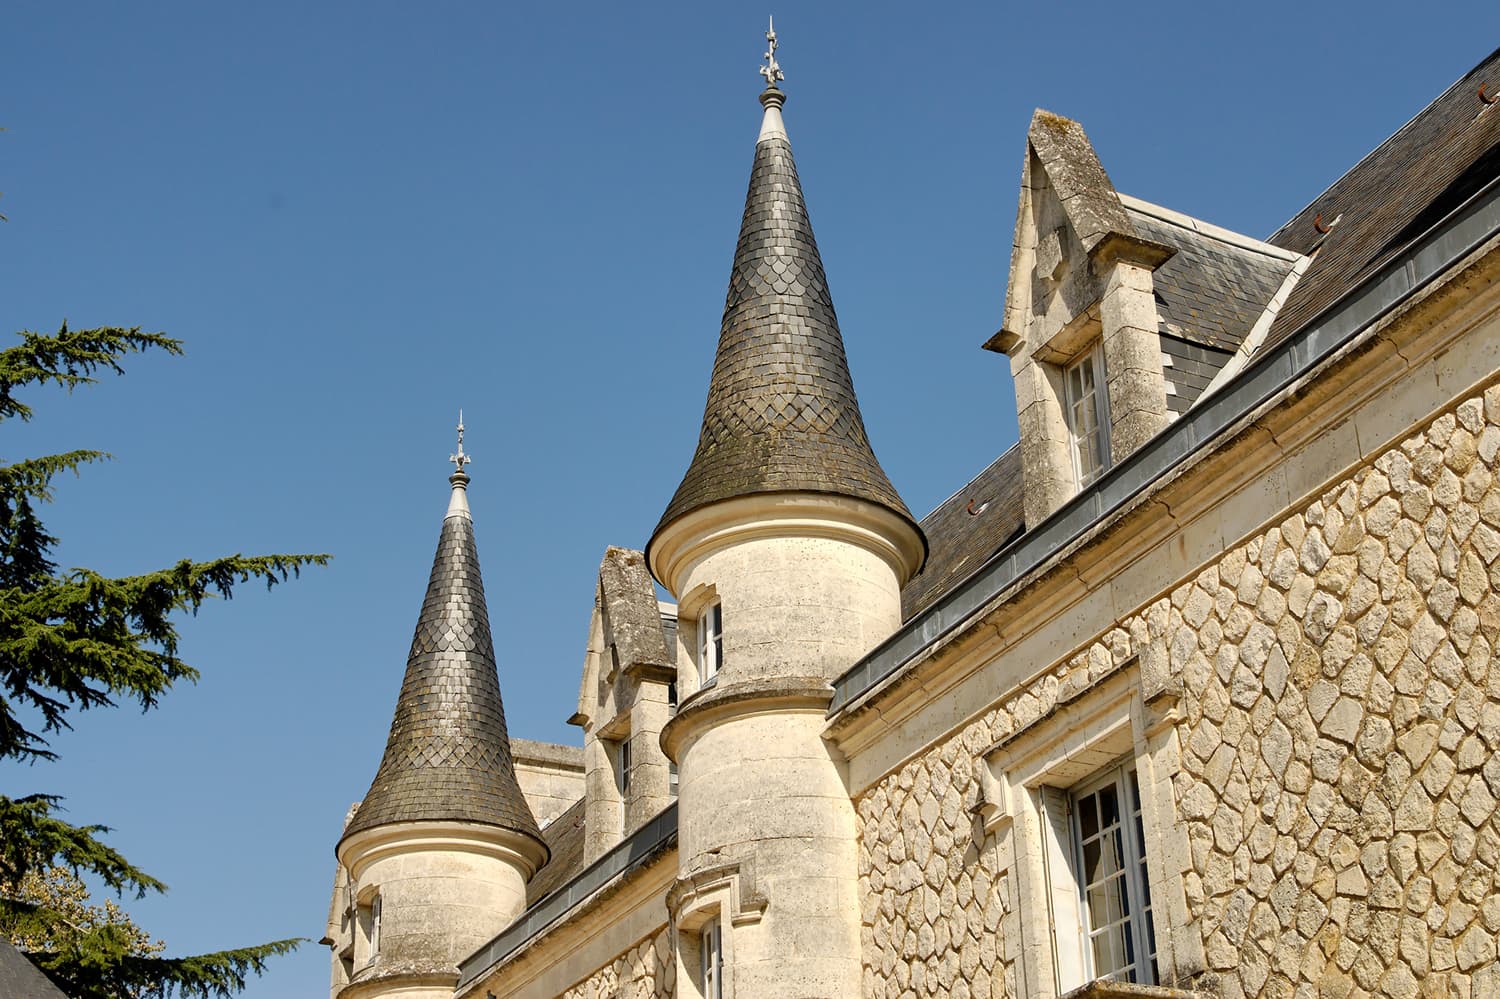 Vacation château in West France